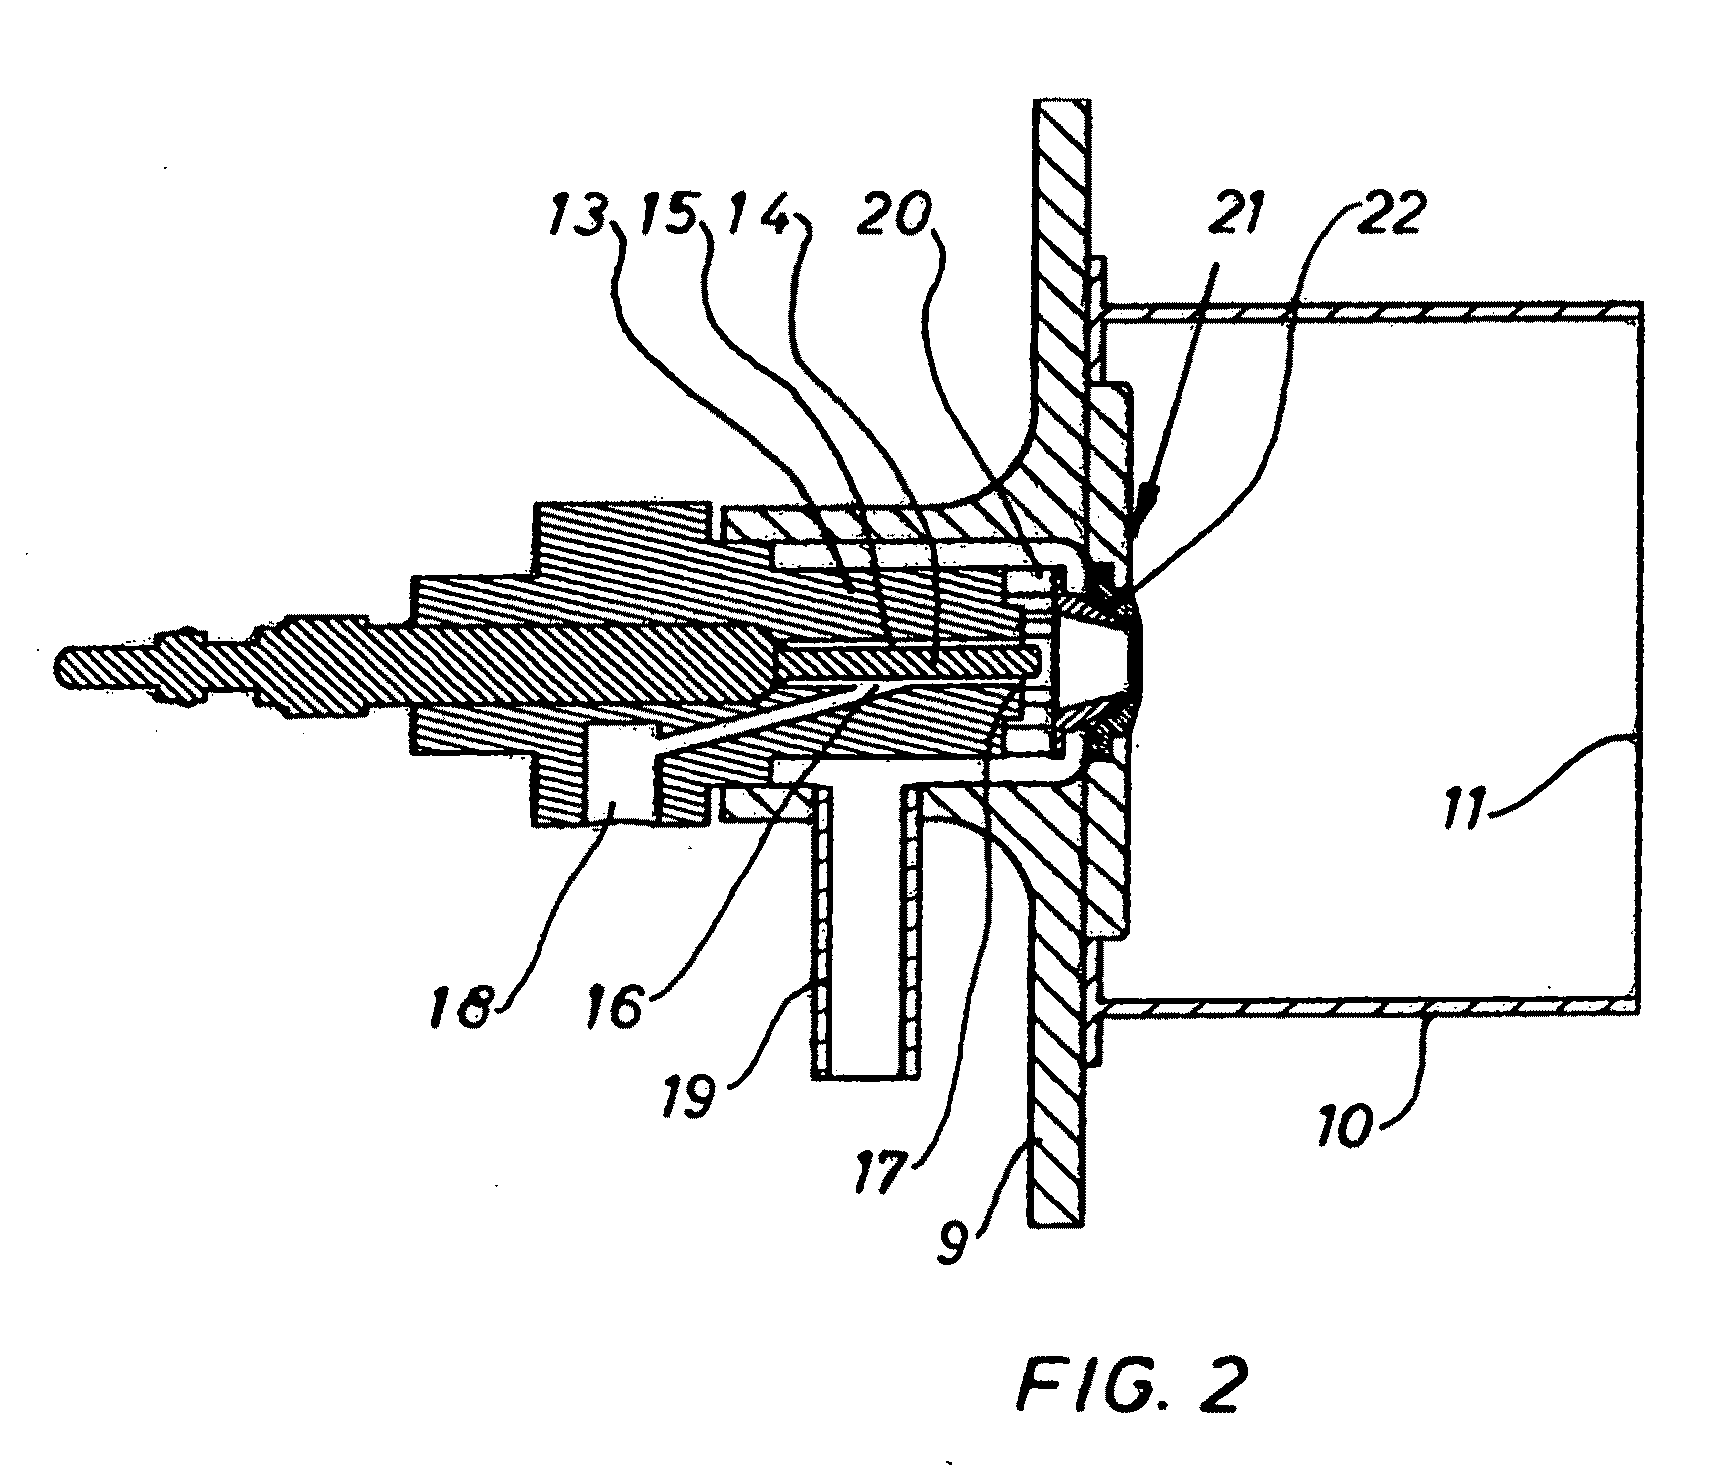 Exhaust-gas after-treatment system for an auto-ignition internal combustion engine